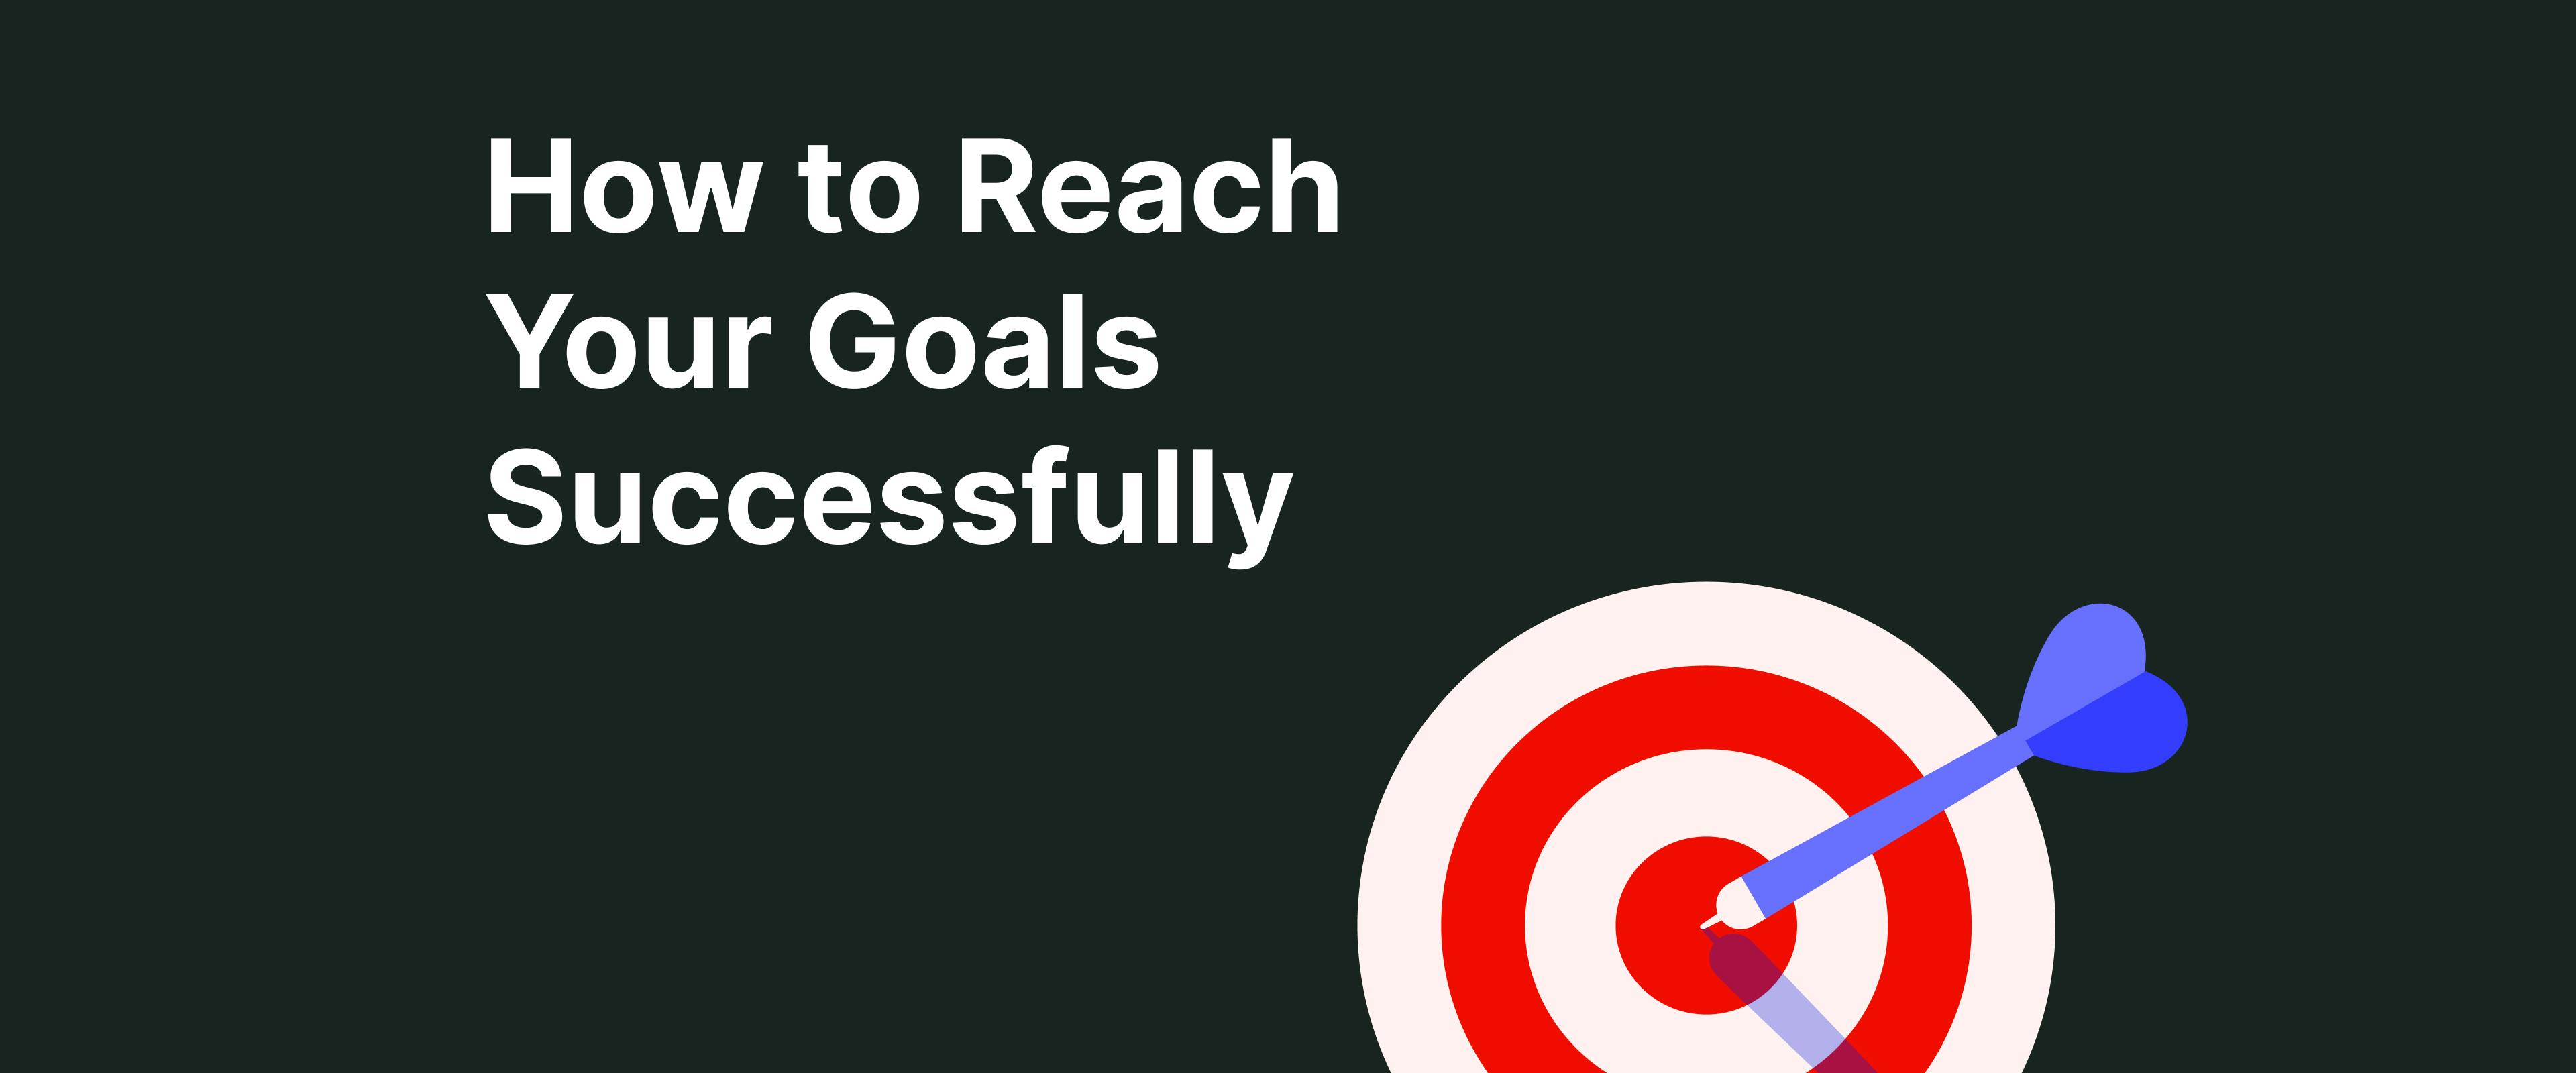 How to Reach Your Goals Successfully